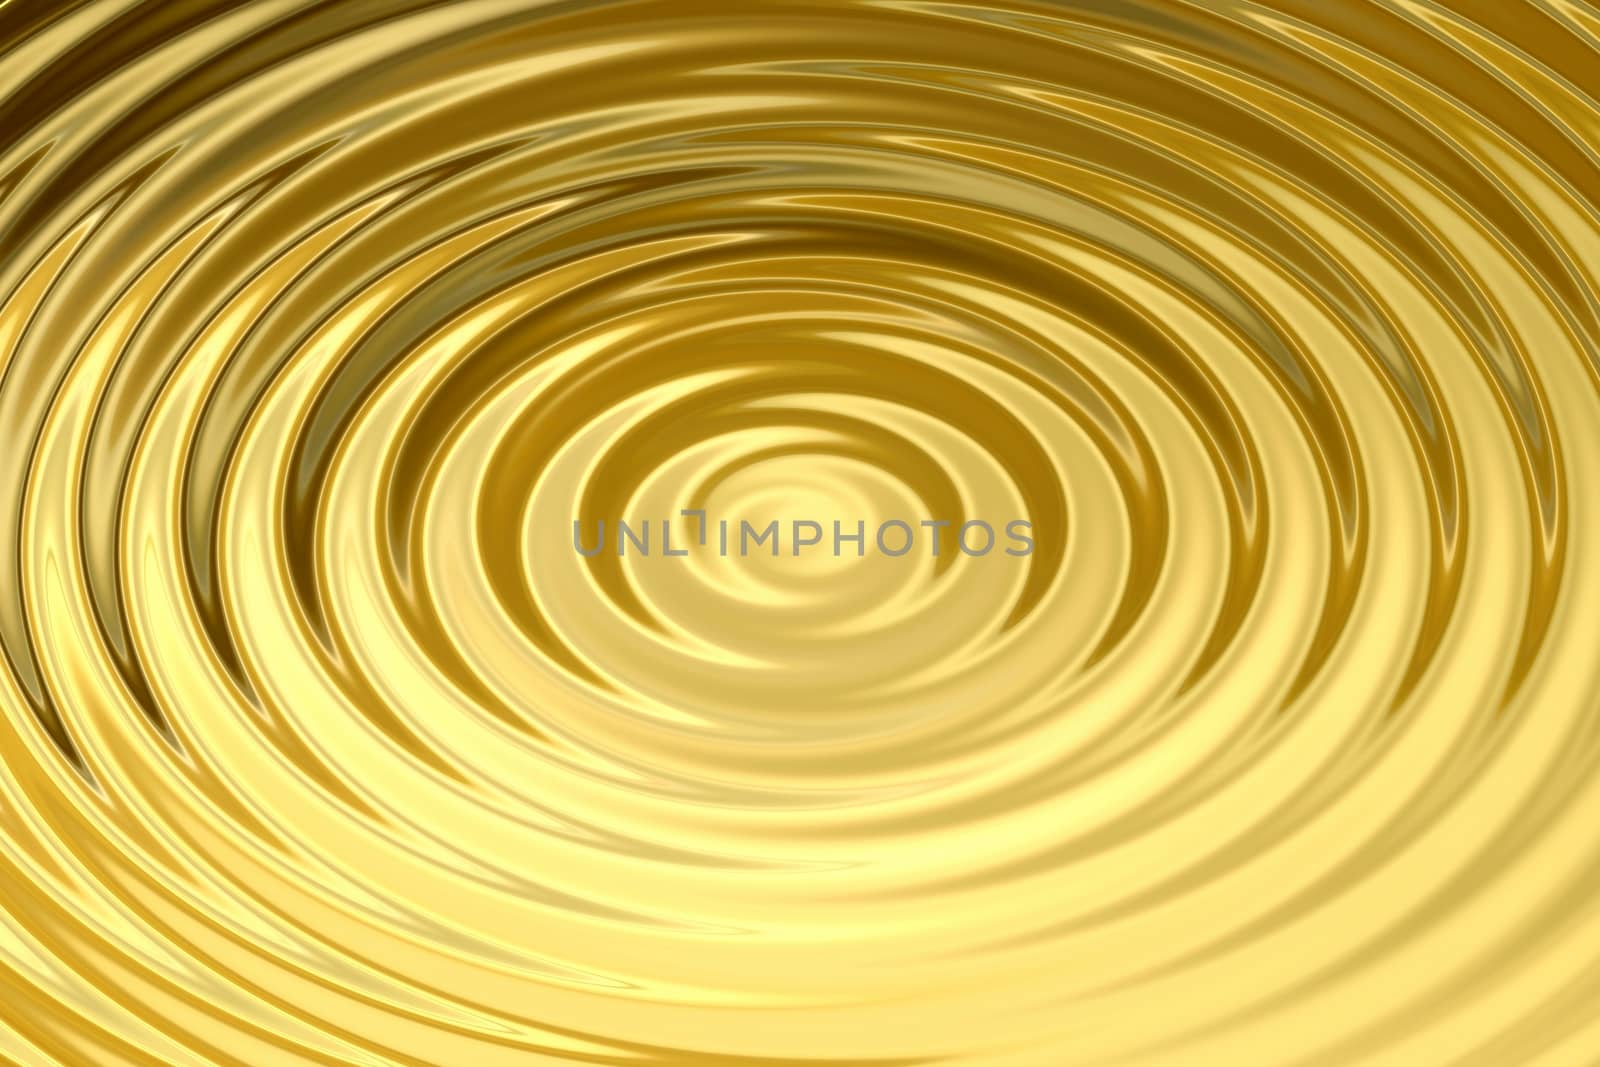 Glowing gold water ring with liquid ripple, abstract background texture by mouu007